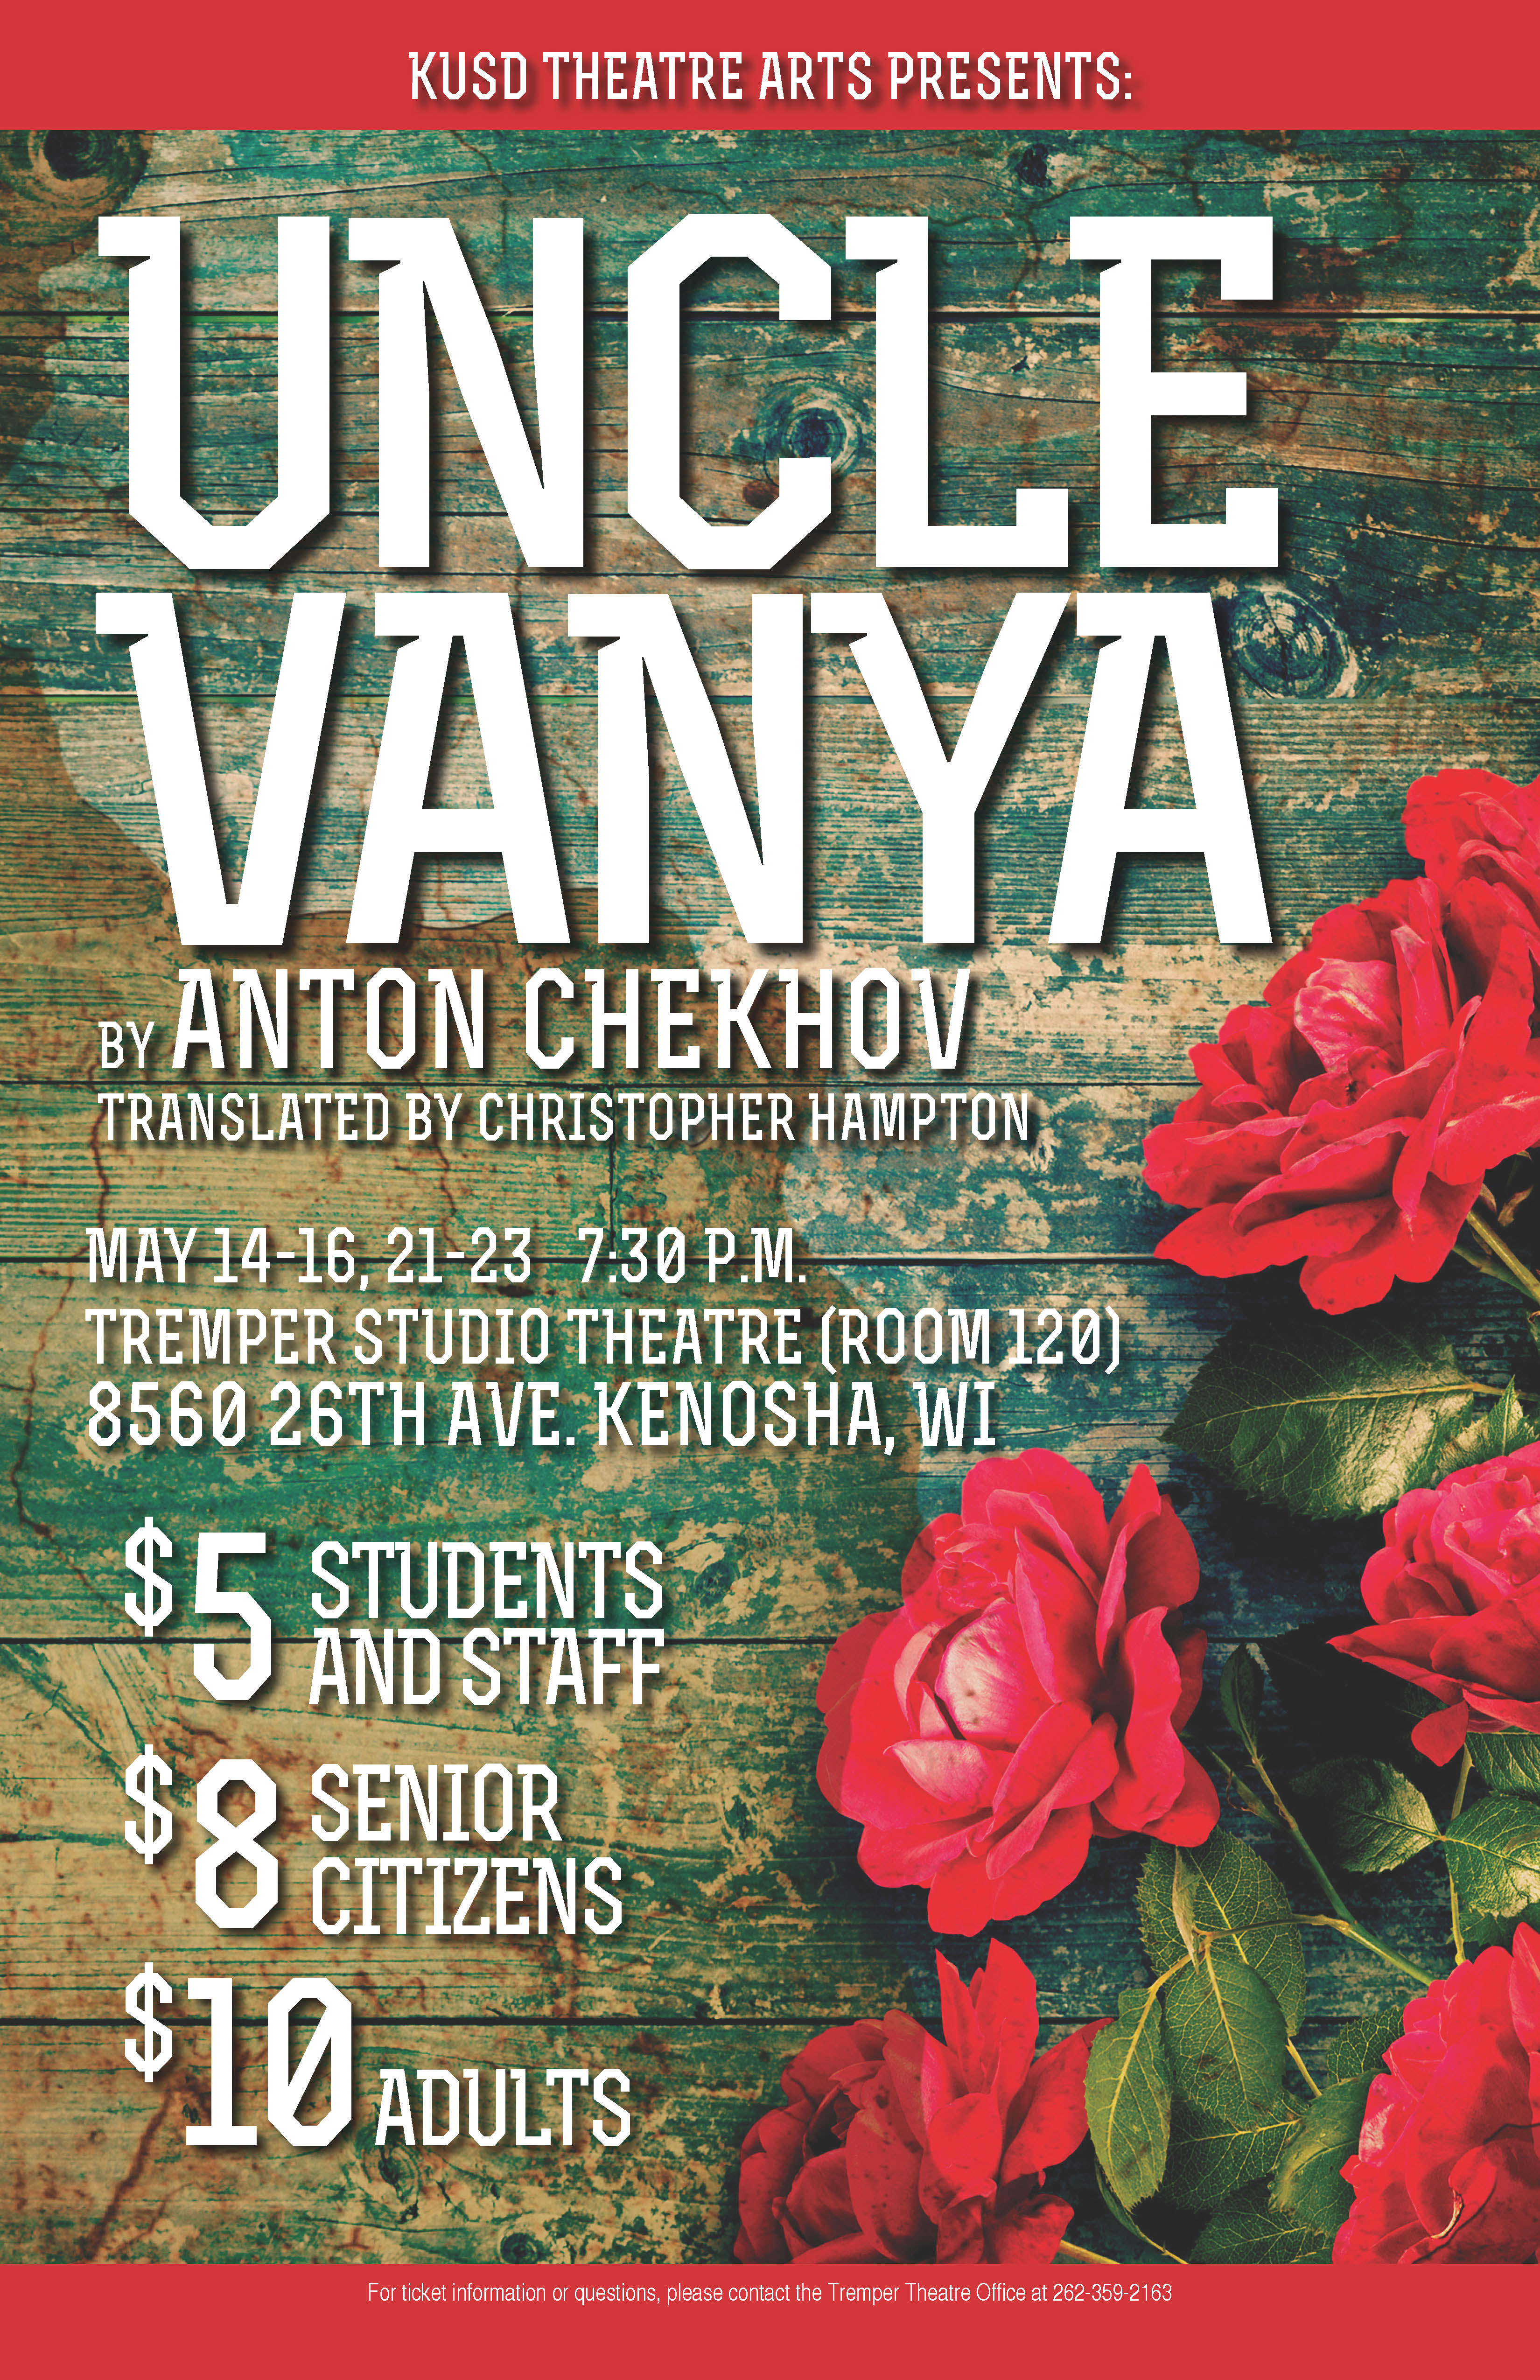 The poster for Uncle Vanya